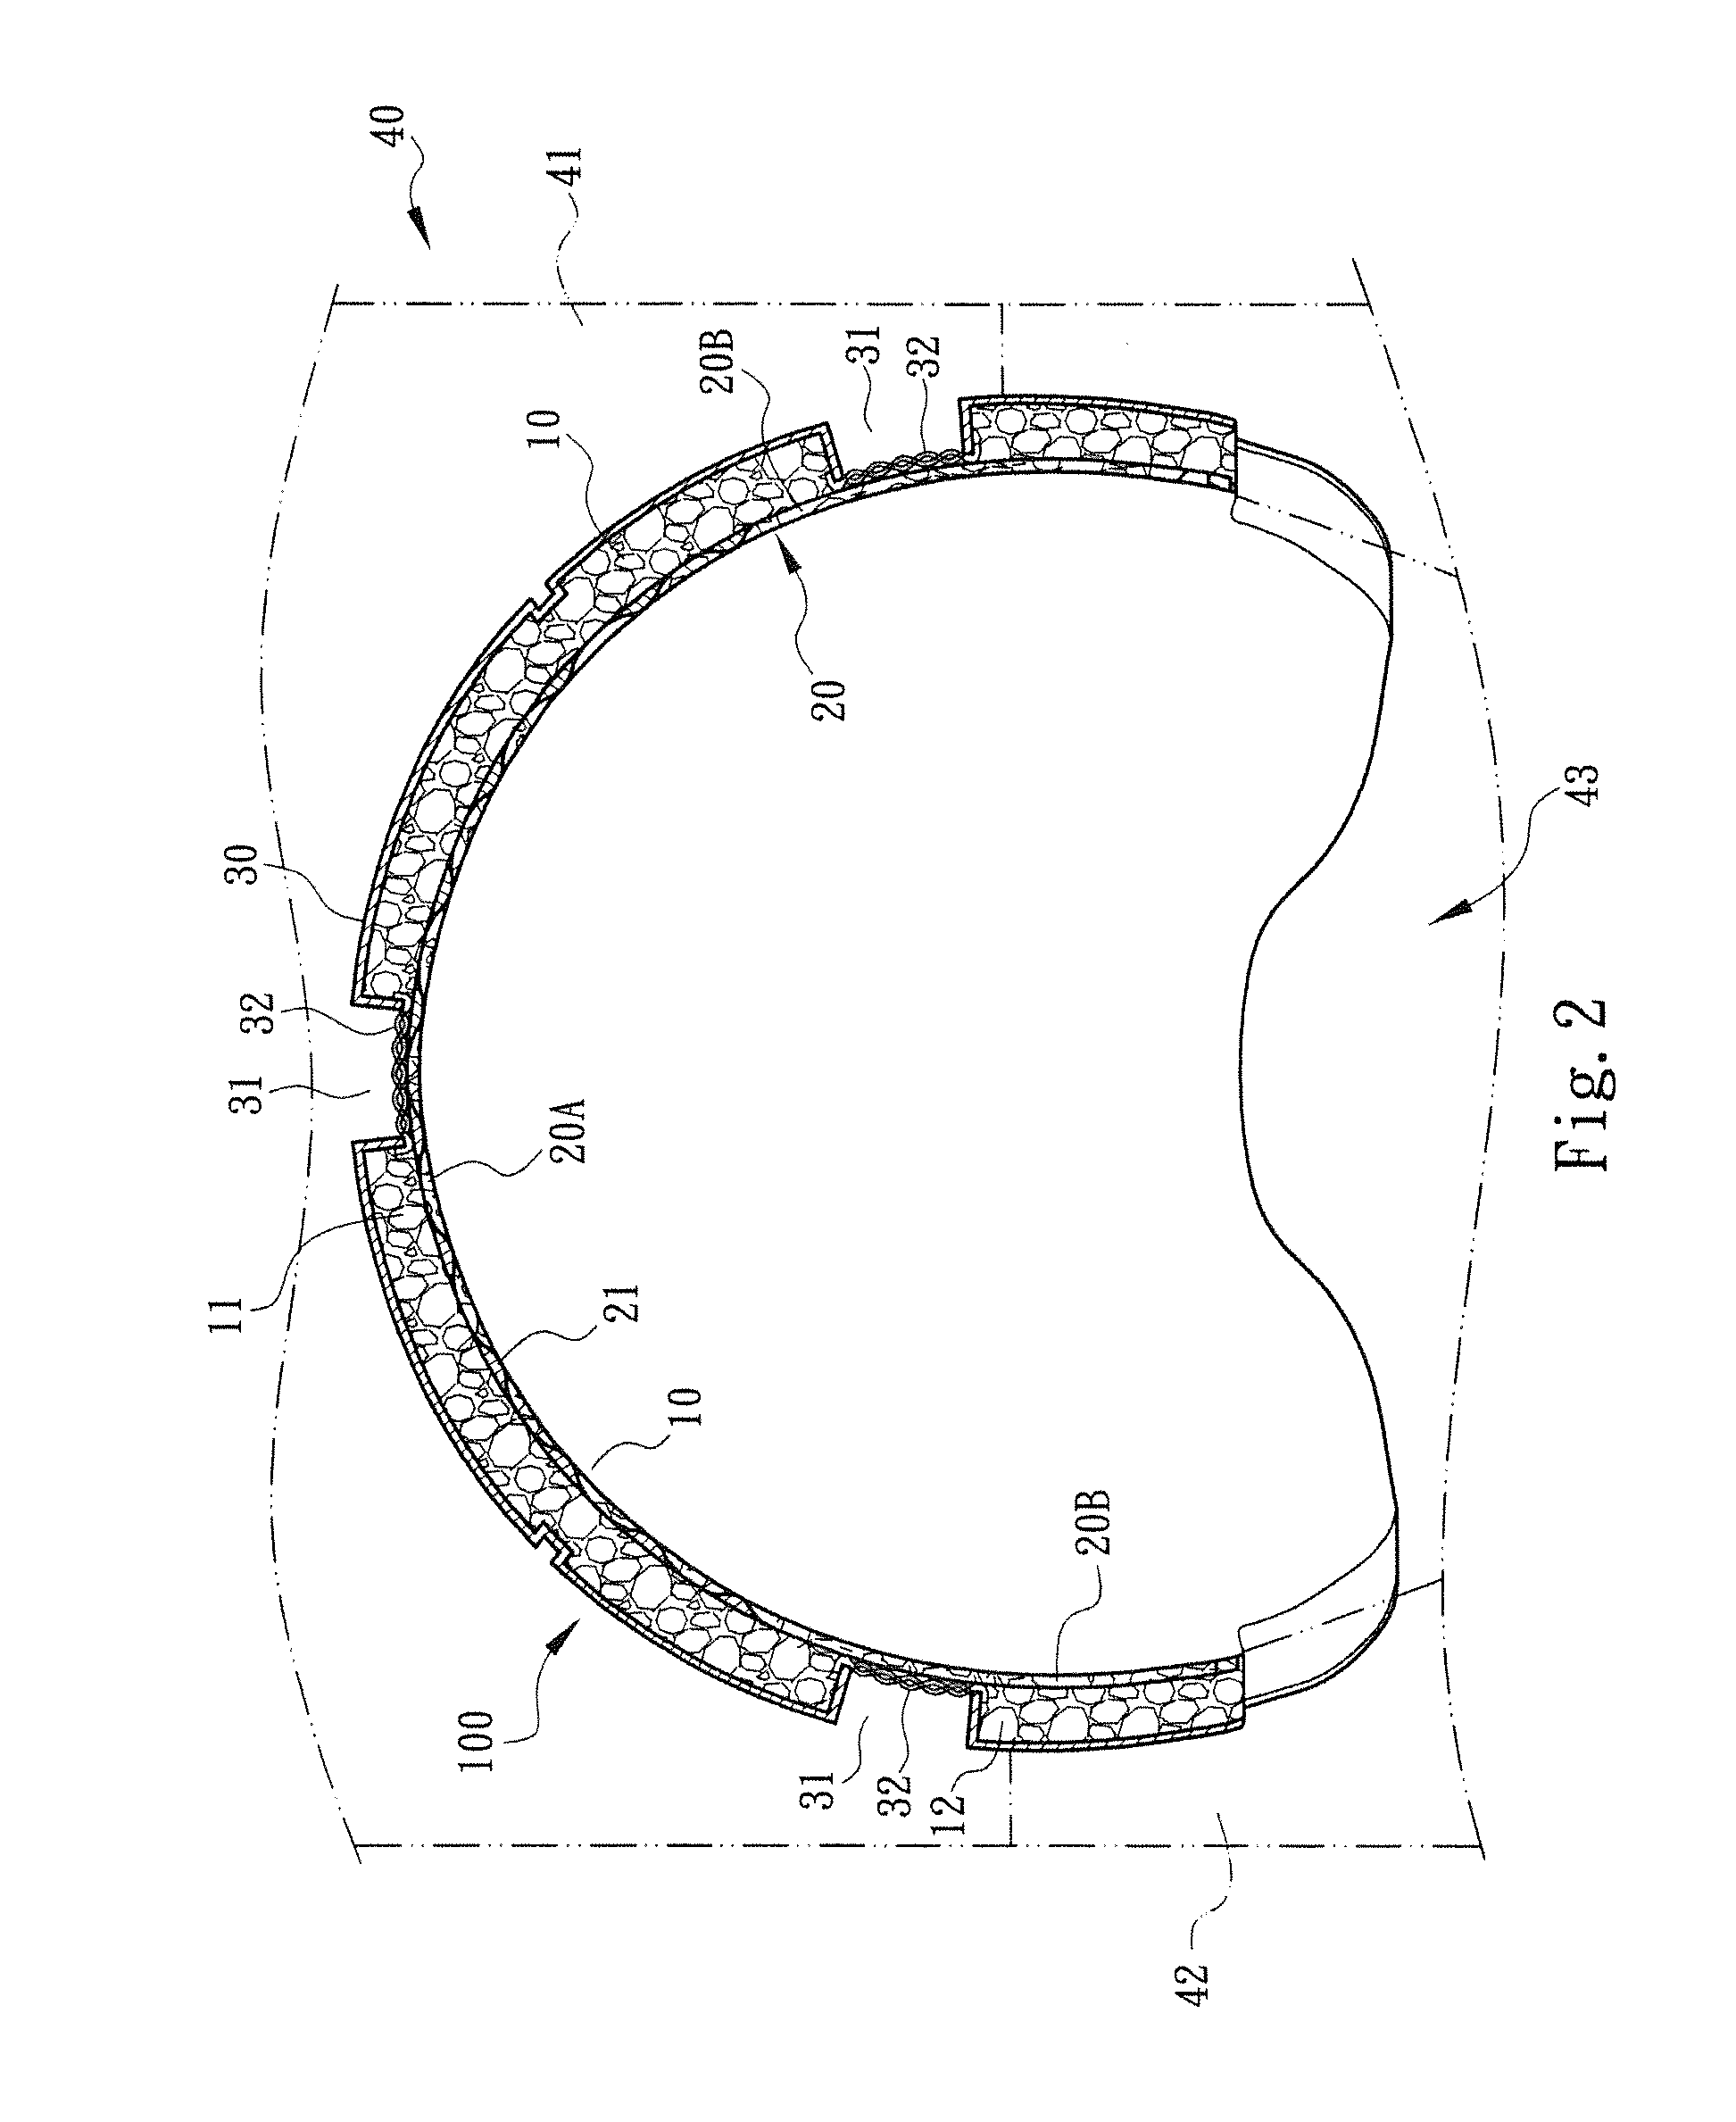 Reinforcement structure of safety helmet and manufacturing method thereof